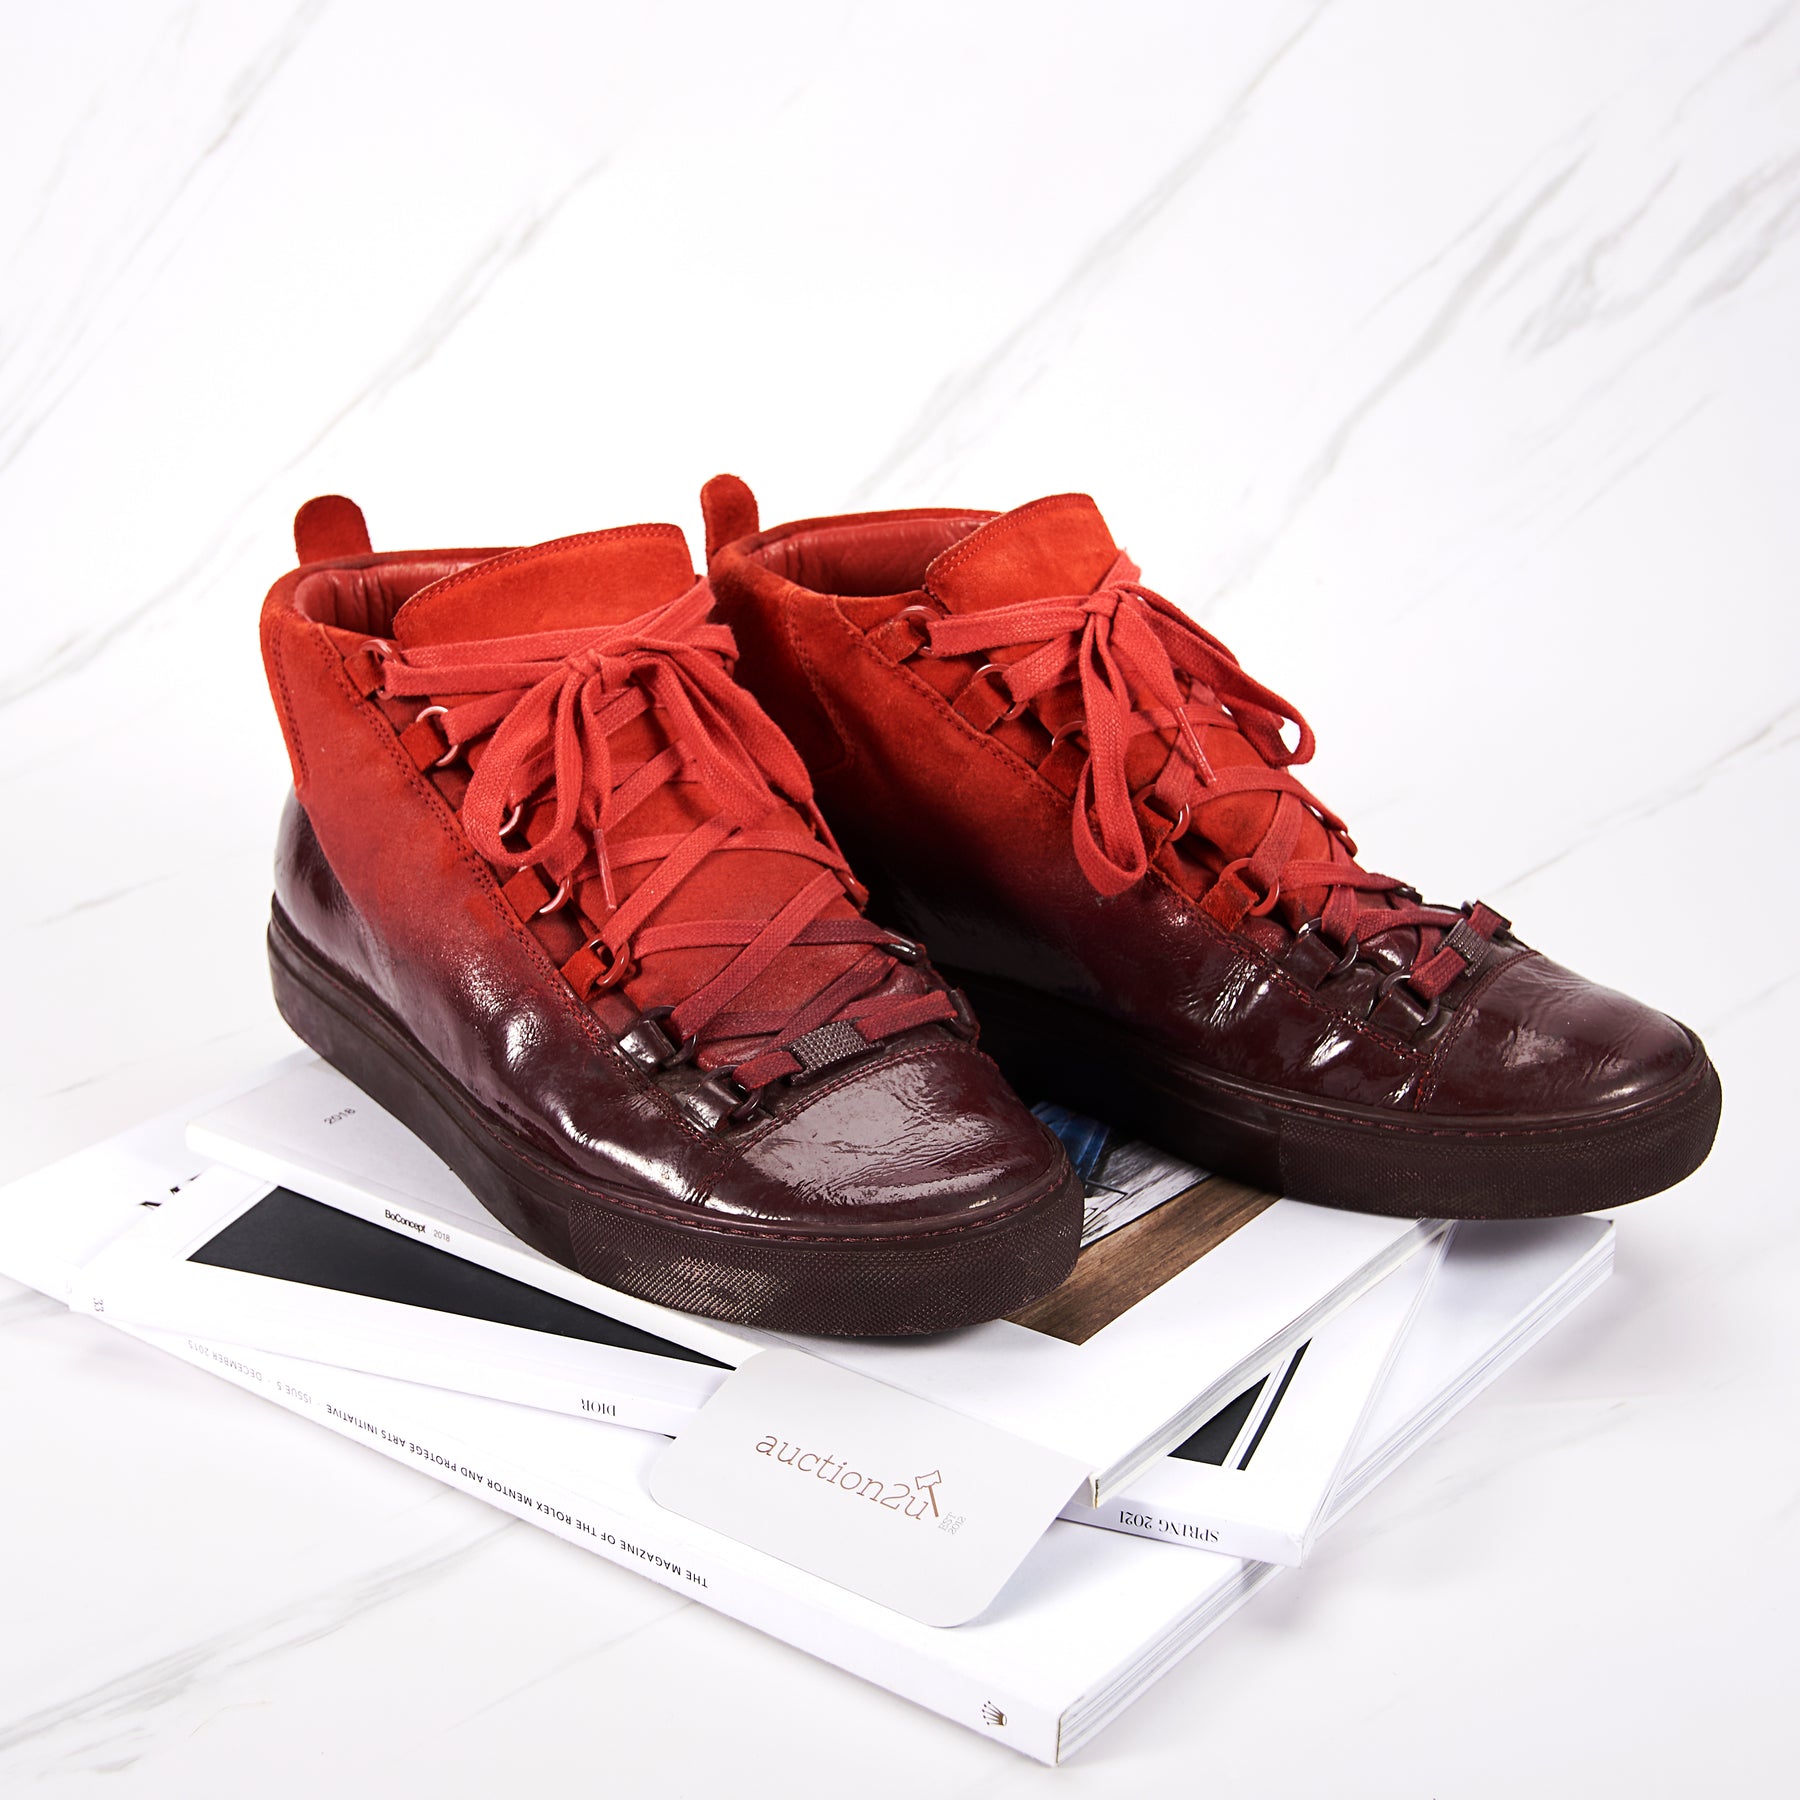 Preowned Balenciaga Red Suede Ombre Leather High Top Shoes  Size   Auction2u Malaysia